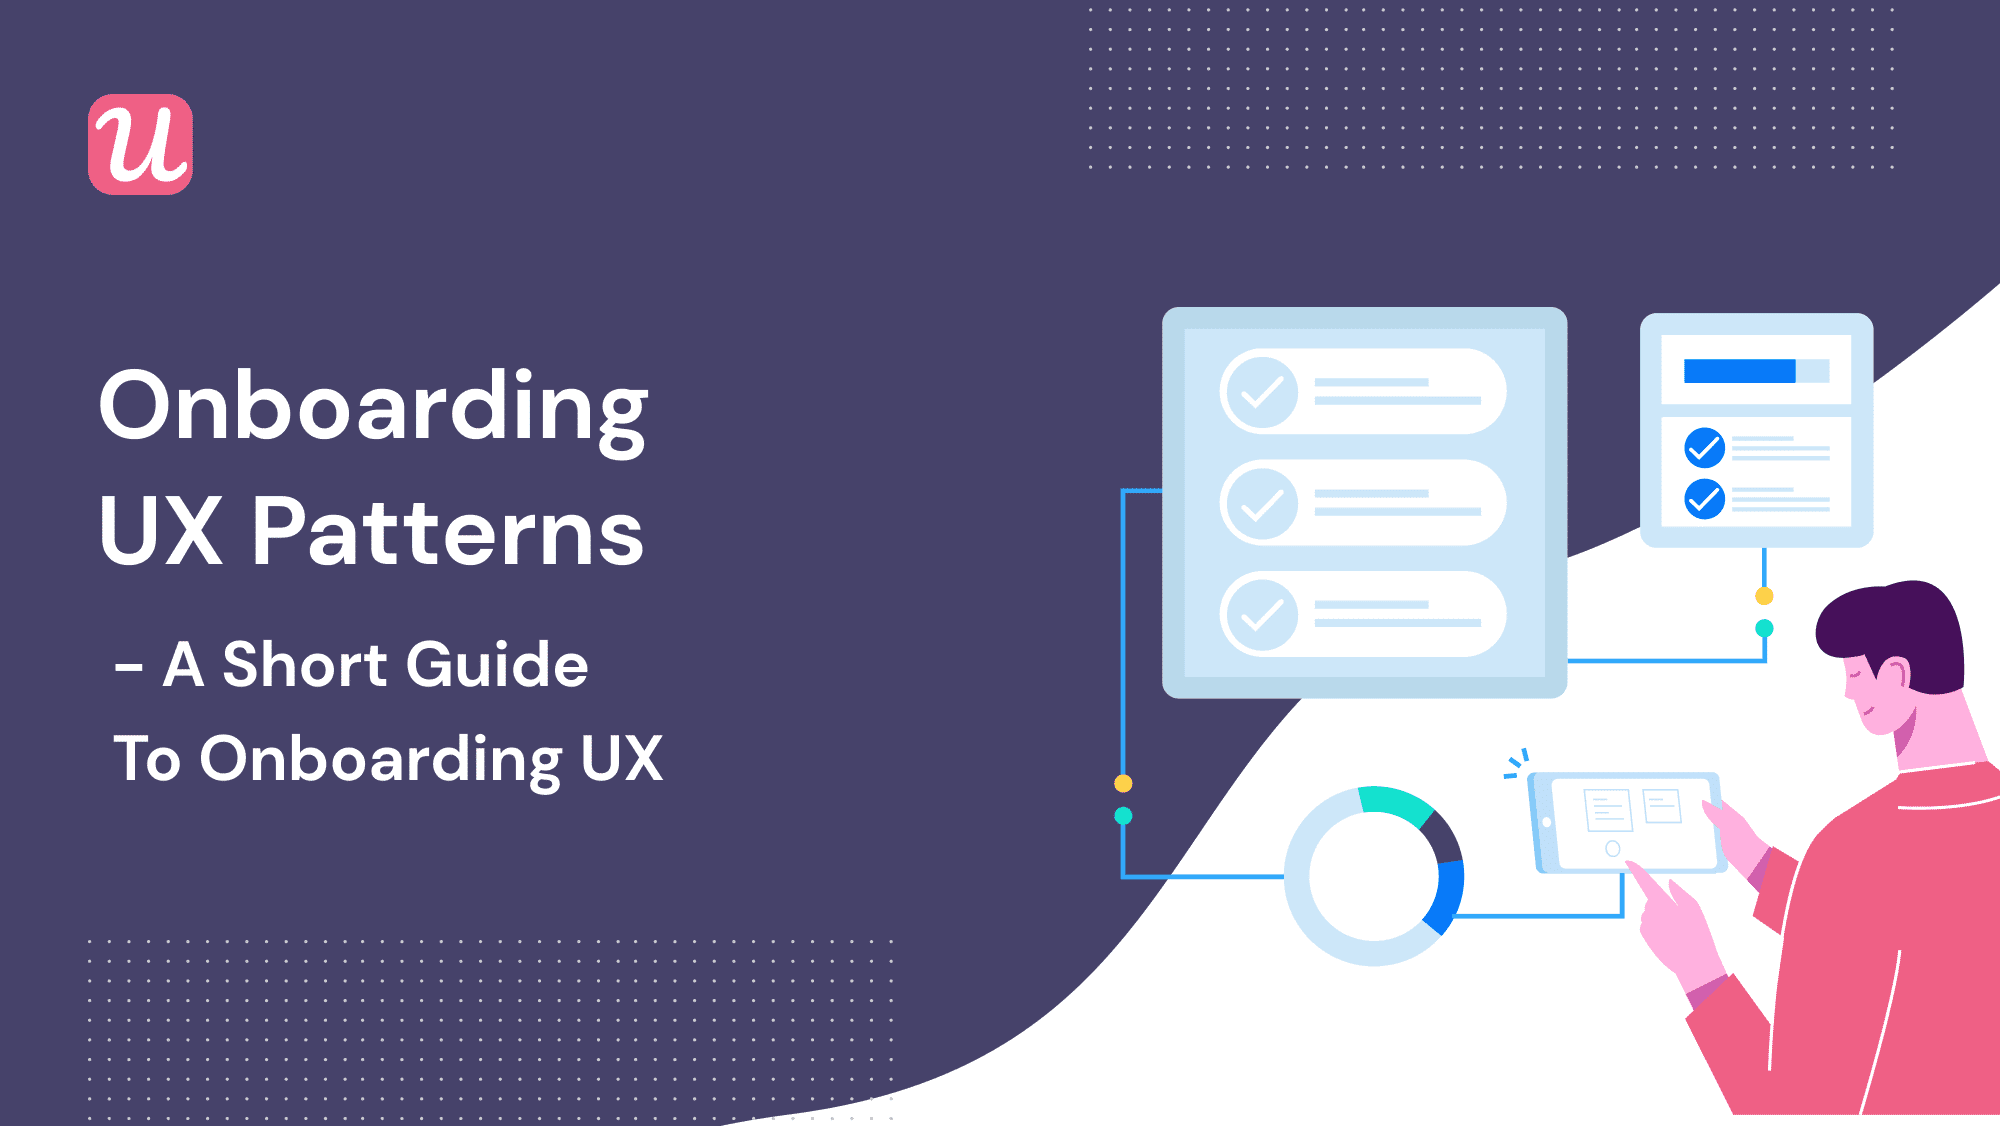 Onboarding UX Patterns: A Short Guide to Onboarding UX